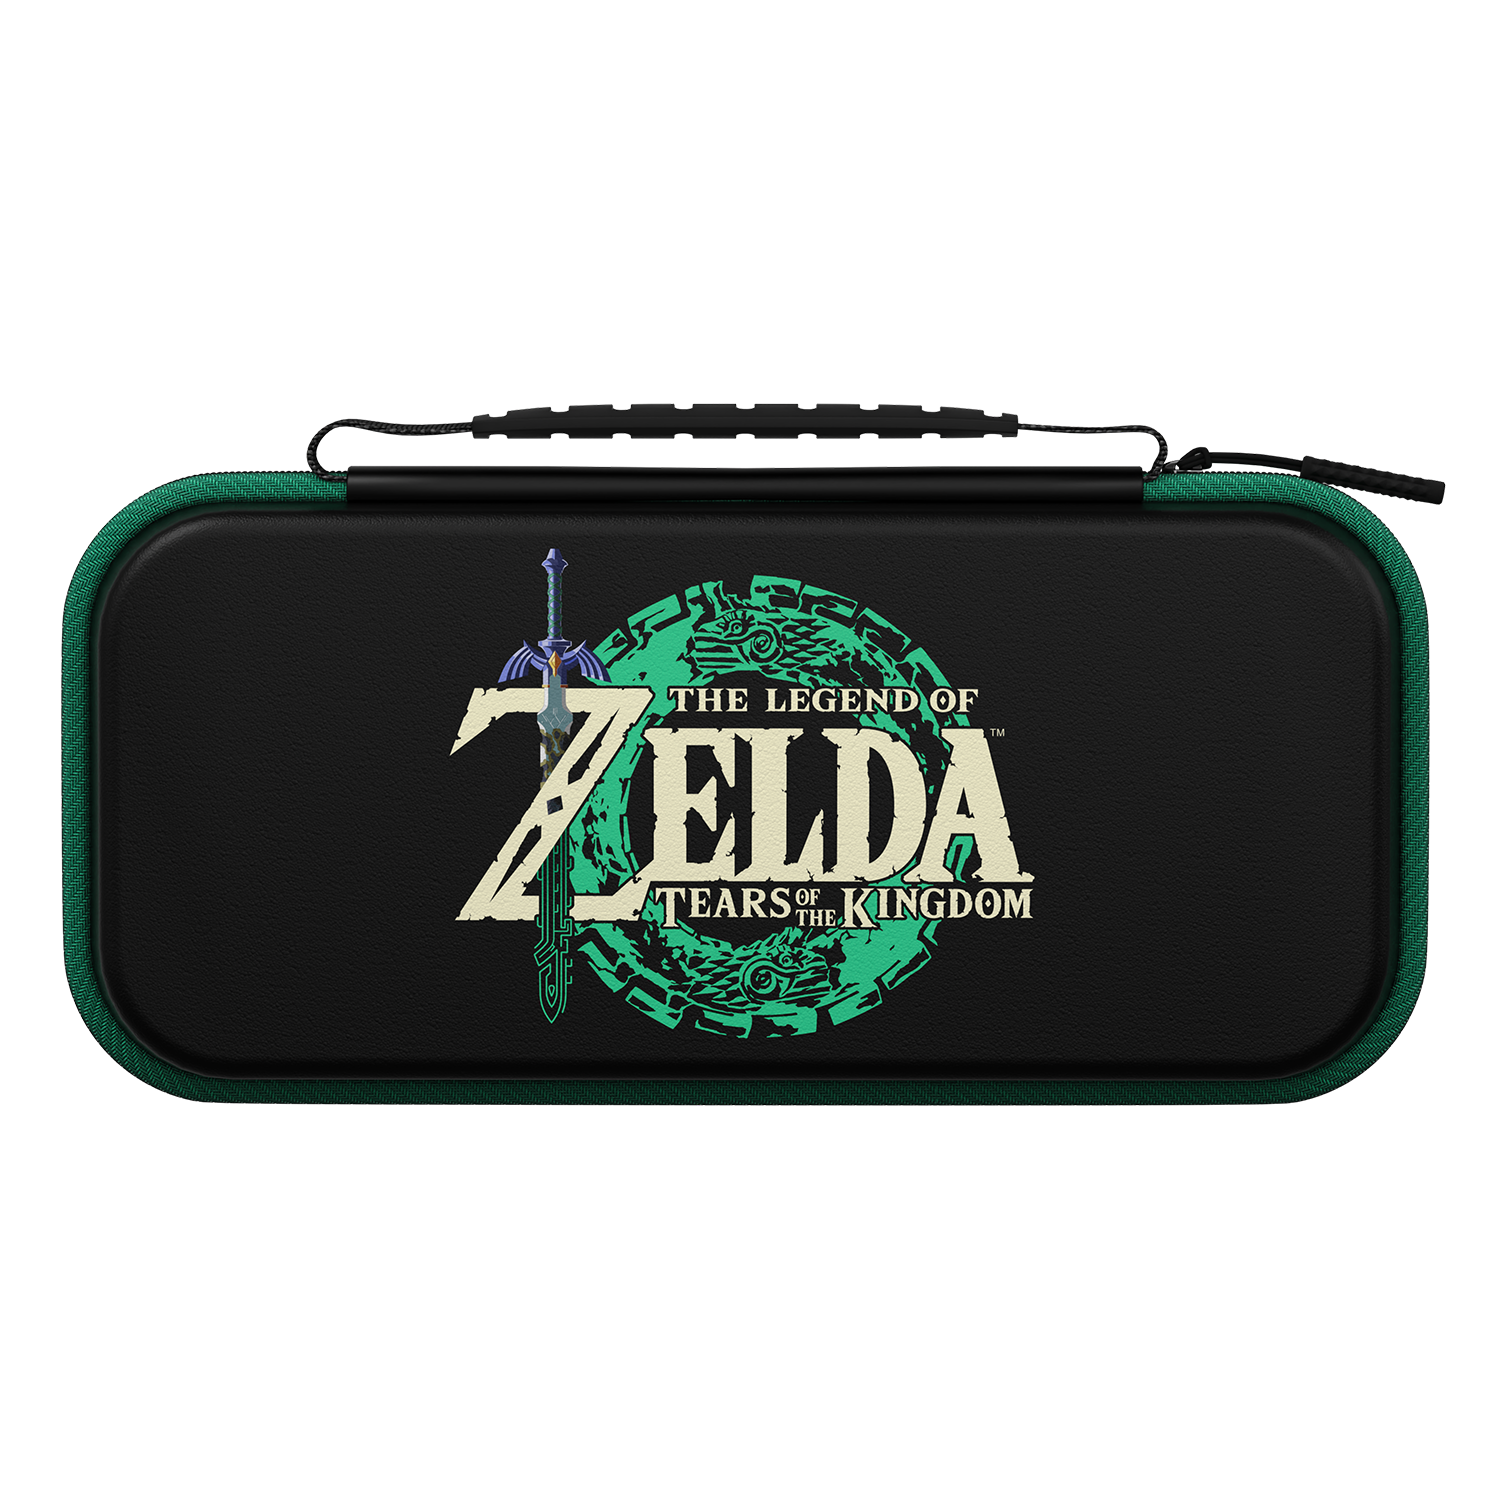 Carrying Case for Nintendo Switch The Legend of Zelda: Tears of